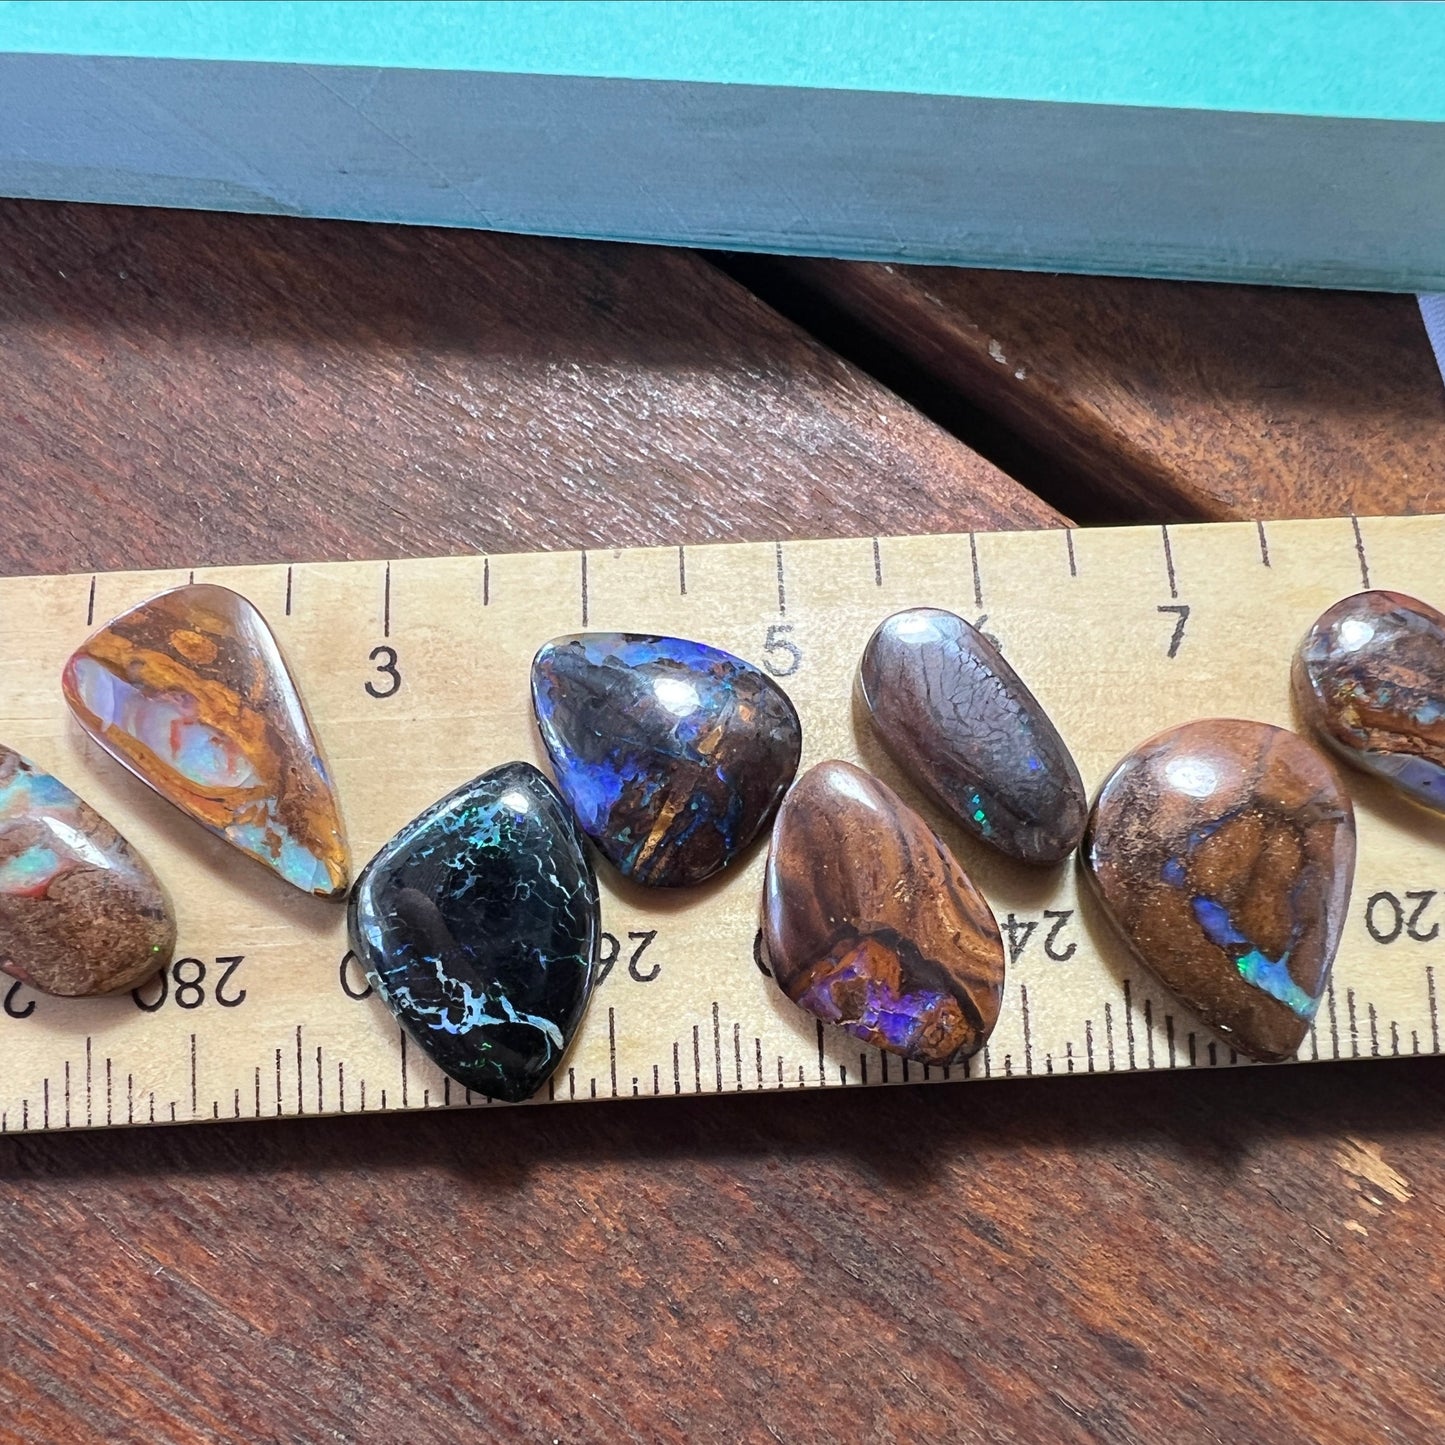 8 lovely boulder opals from Winton. Nice polish and colours.